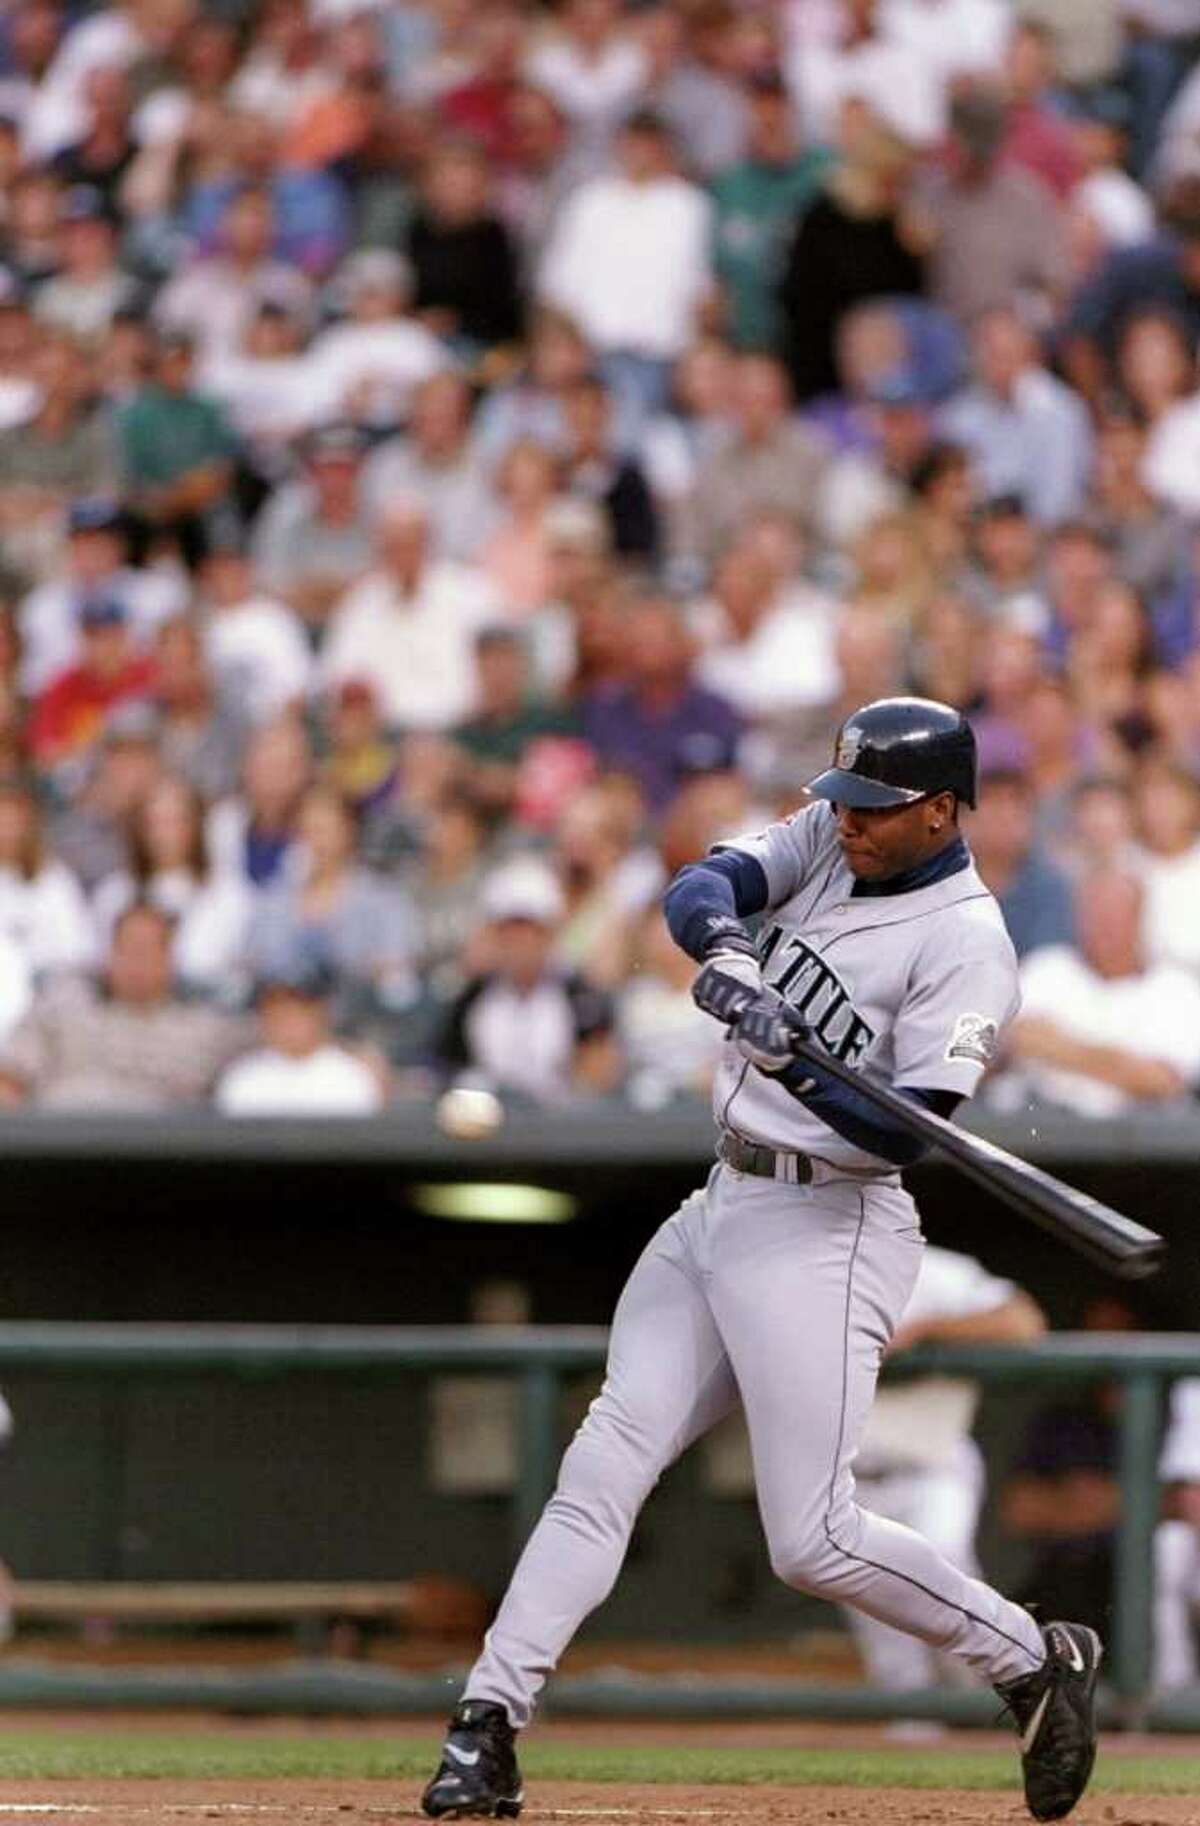 Ken Griffey Jr. was in his prime in 1997. He hit 56 homers and had 147 RBIs.